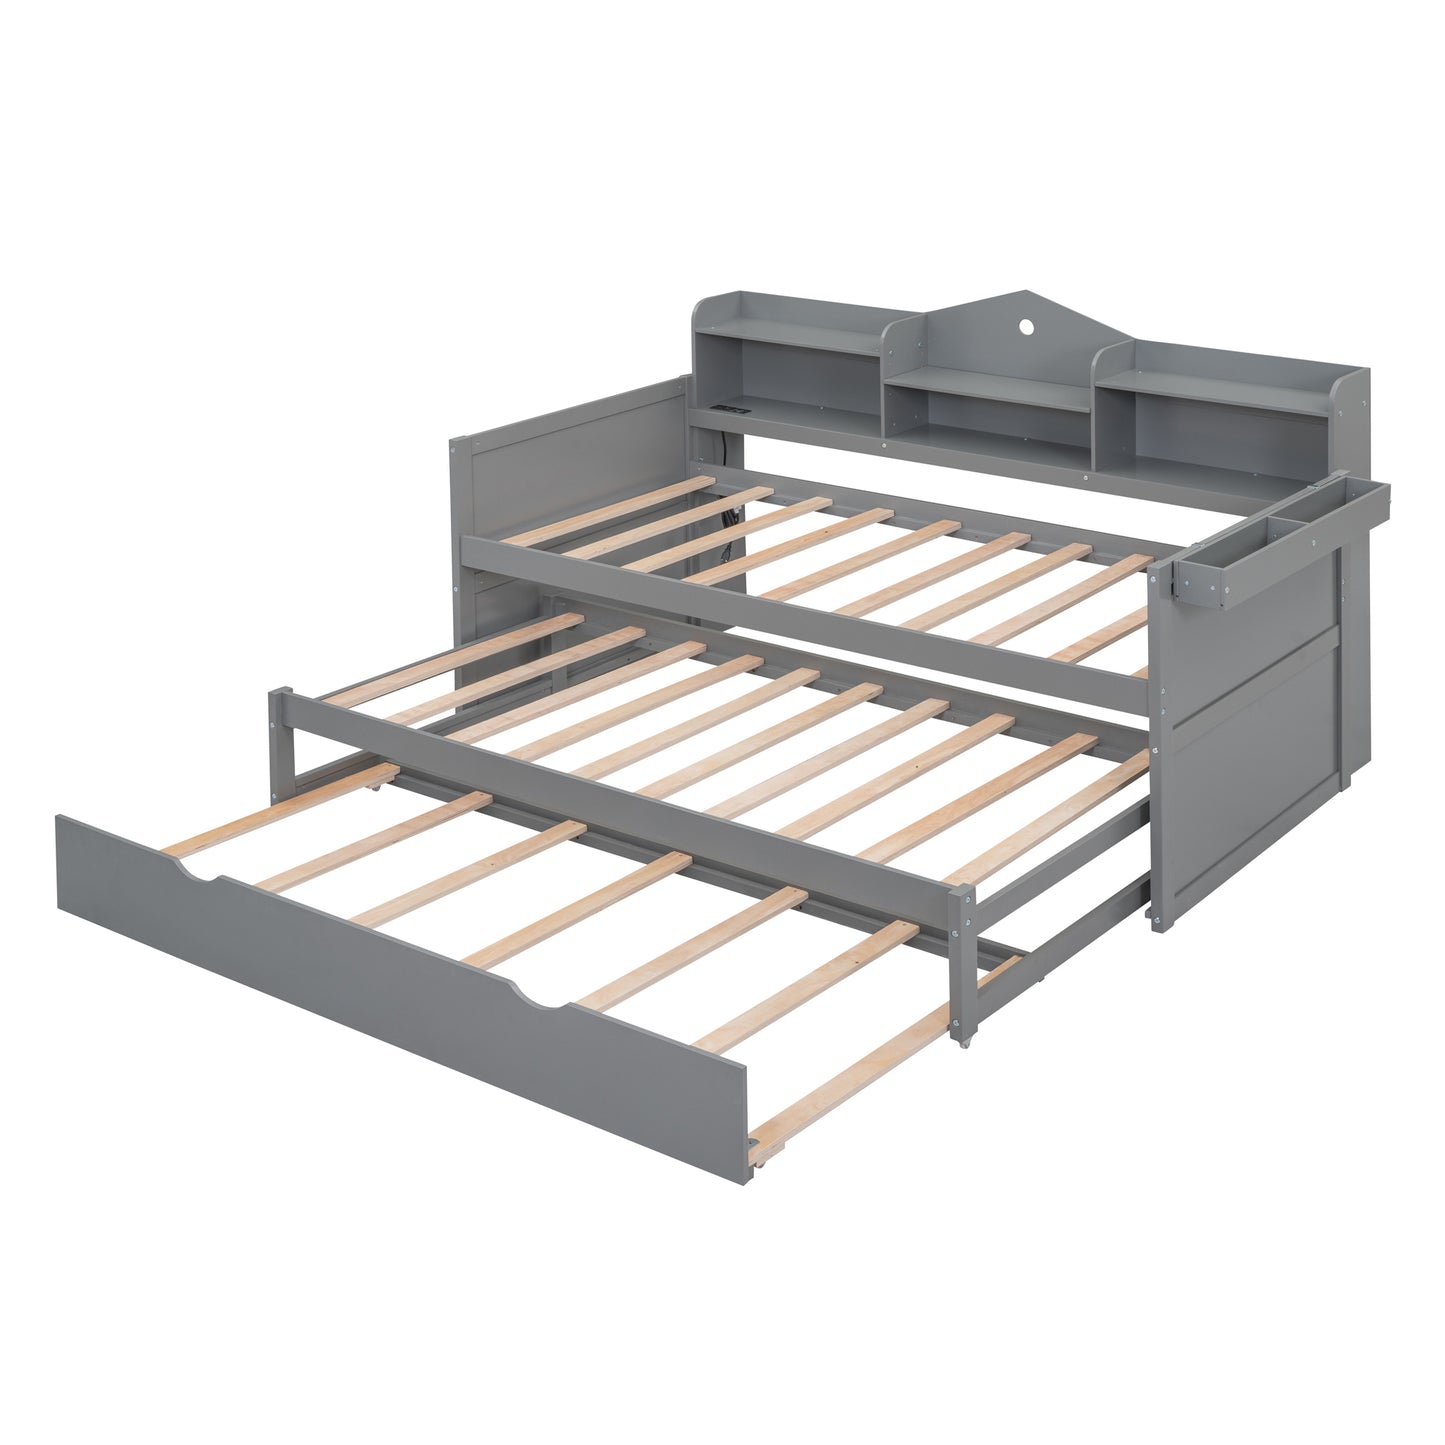 Twin XL Wooden Daybed with 2 Twin Trundles and Storage Shelf, Daybed with USB Charging Ports, No Box-spring Needed, Gray